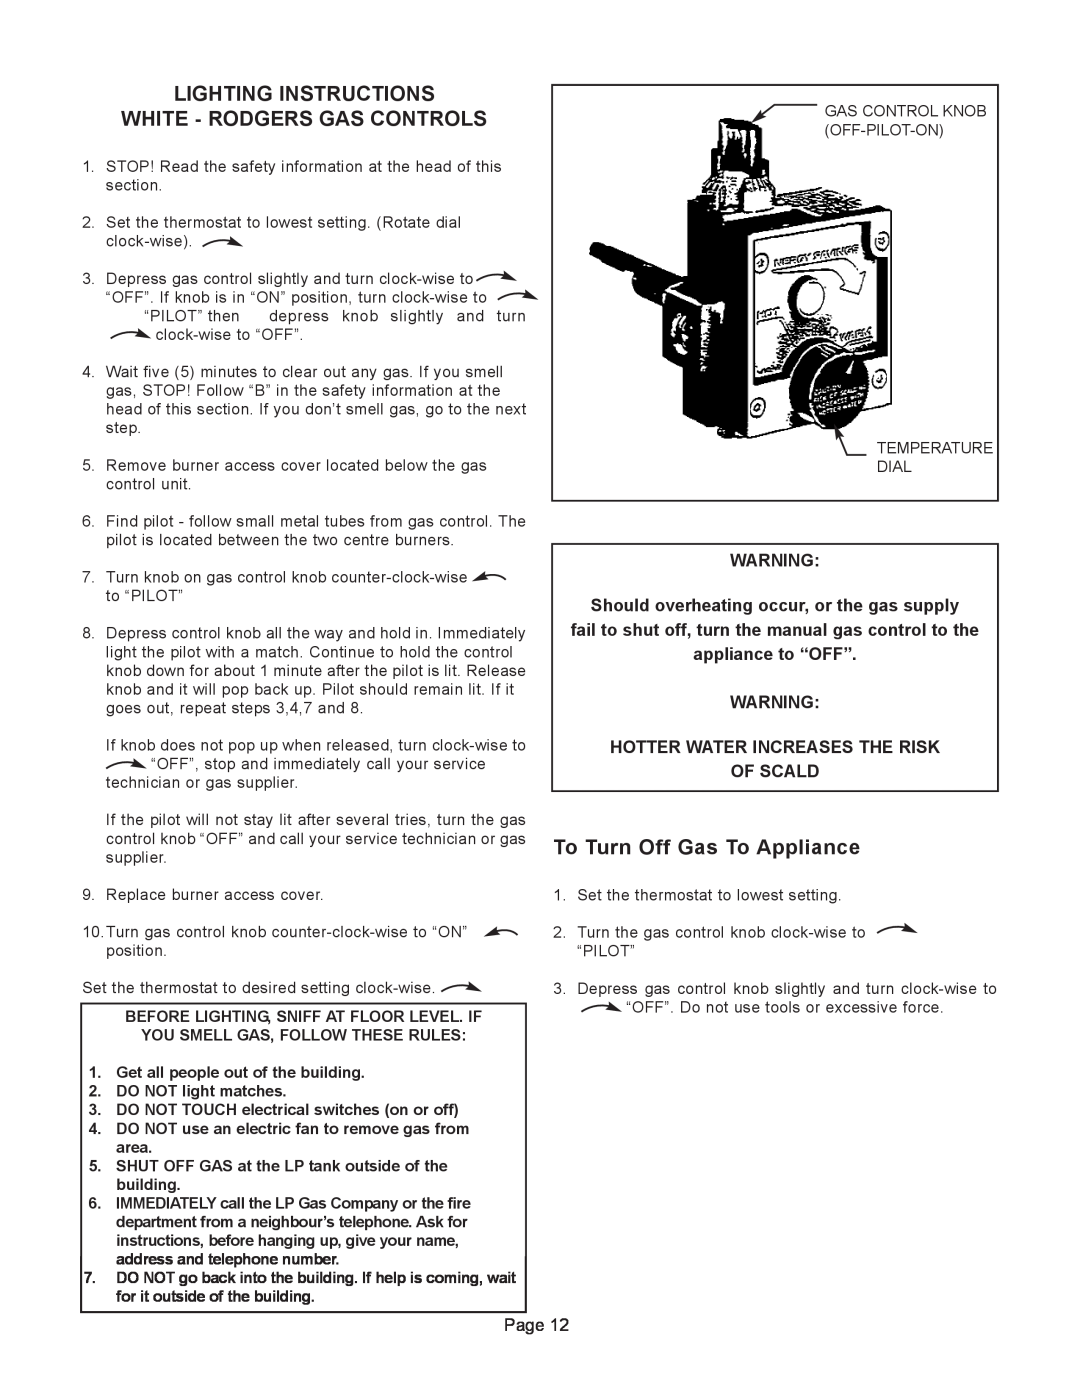 GSW G65 Lighting Instructions, White - Rodgers Gas Controls, To Turn Off Gas To Appliance, appliance to “OFF” 